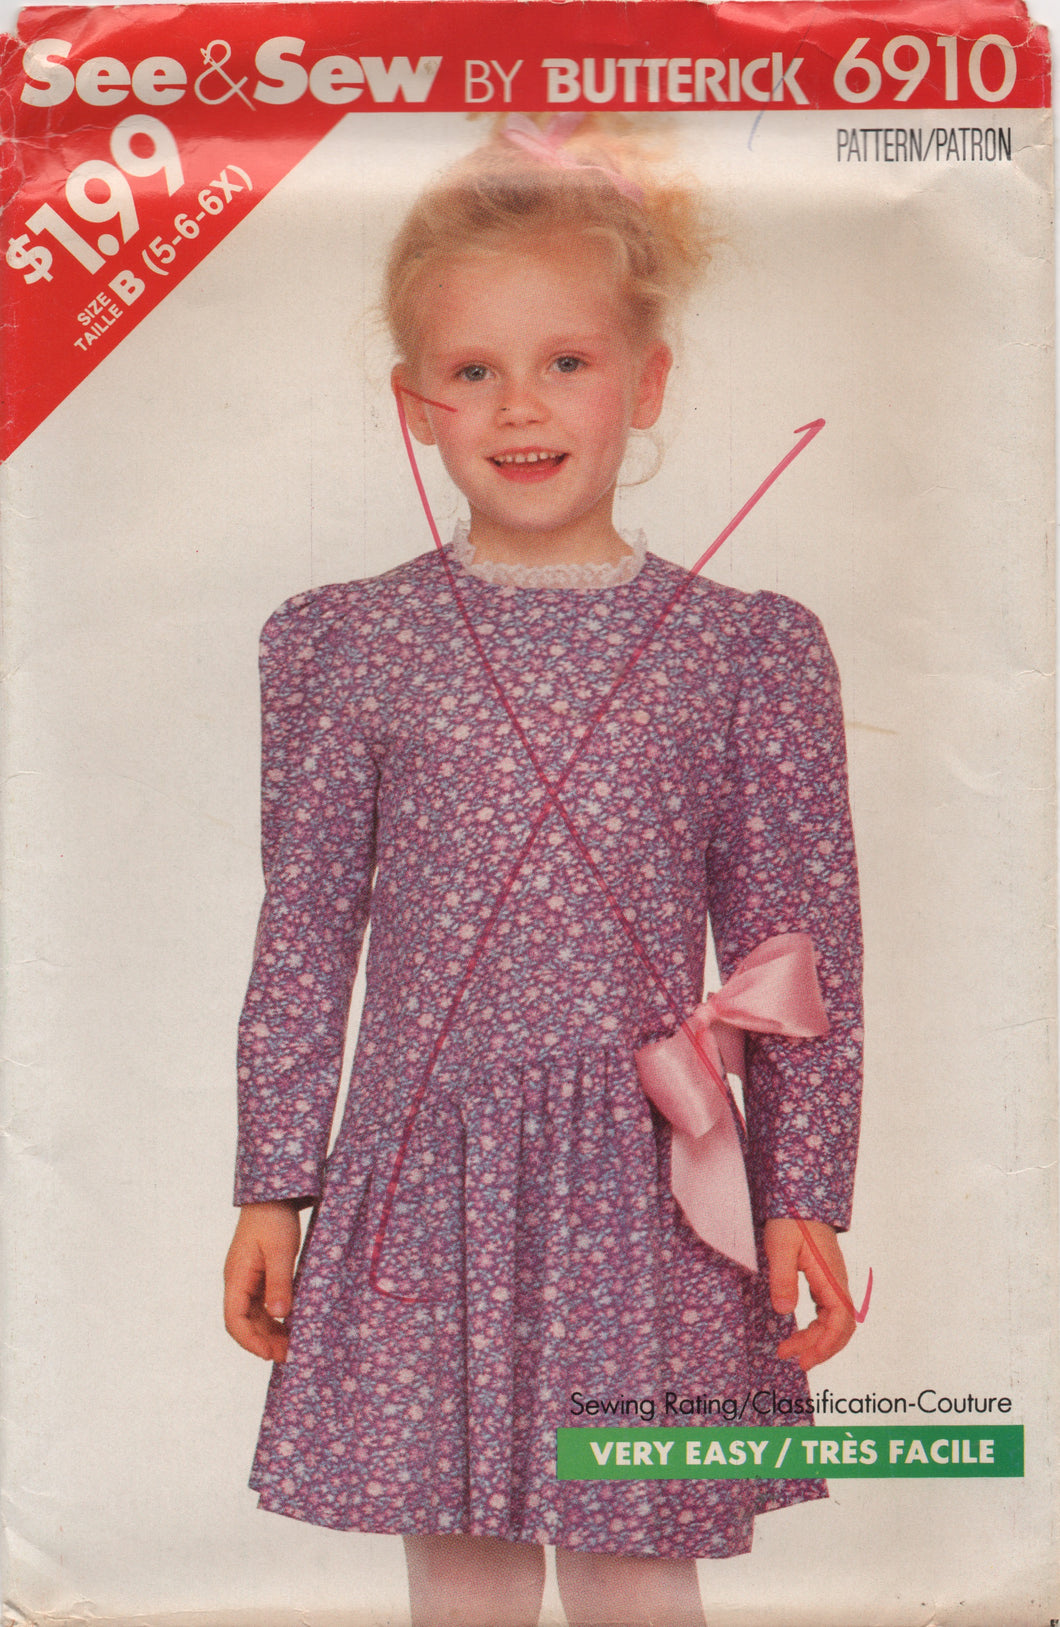 1980's See & Sew Butterick Child's One Piece Dress with angled skirt - Size 5-6-6x - No. 6910